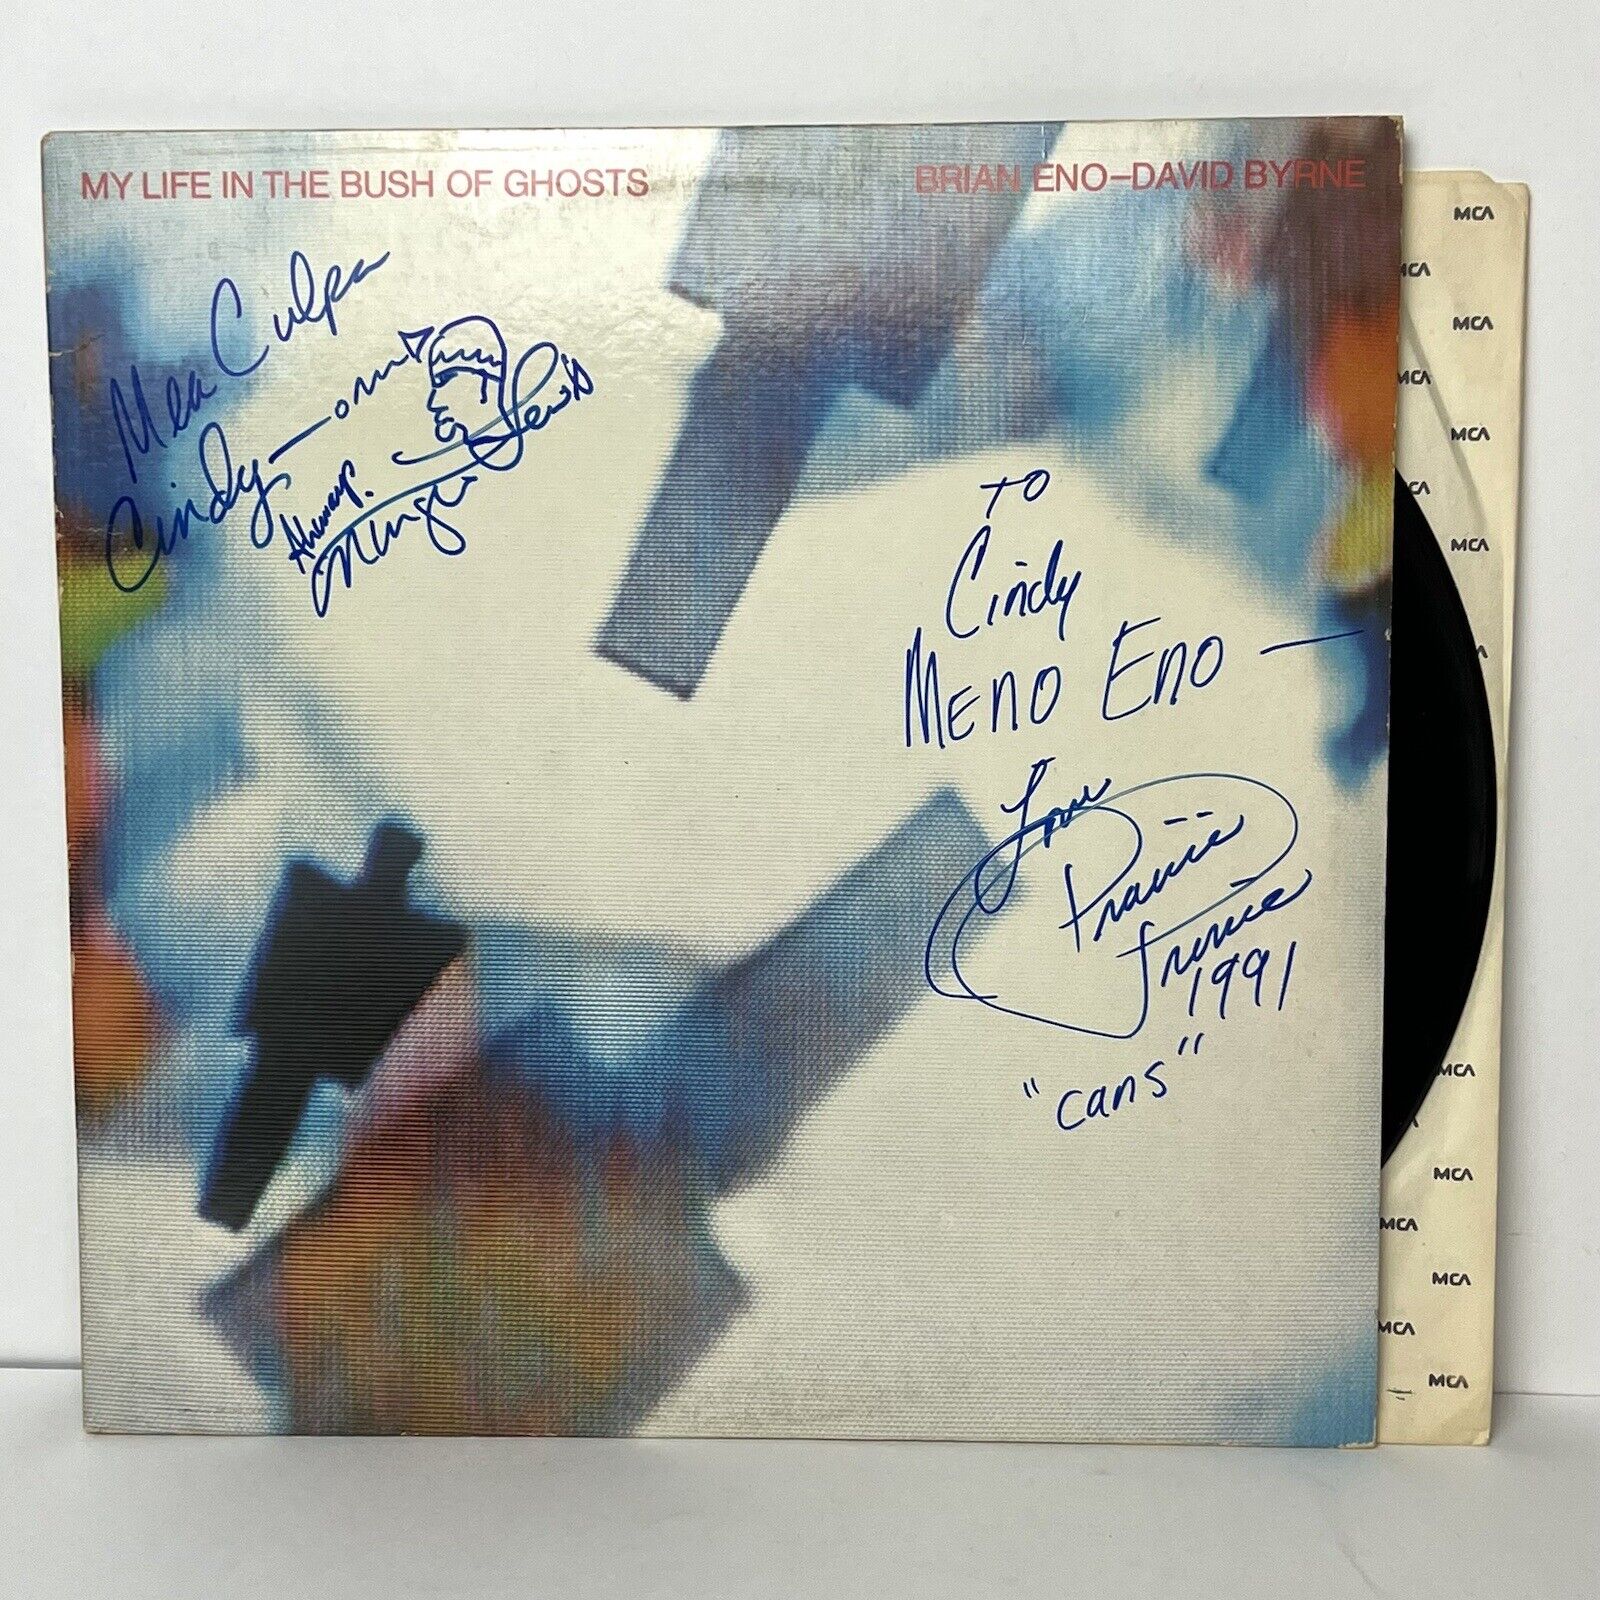 1981 Brian Eno David Byrne My Life in the Bush of Ghosts Vinyl Record Signed LP